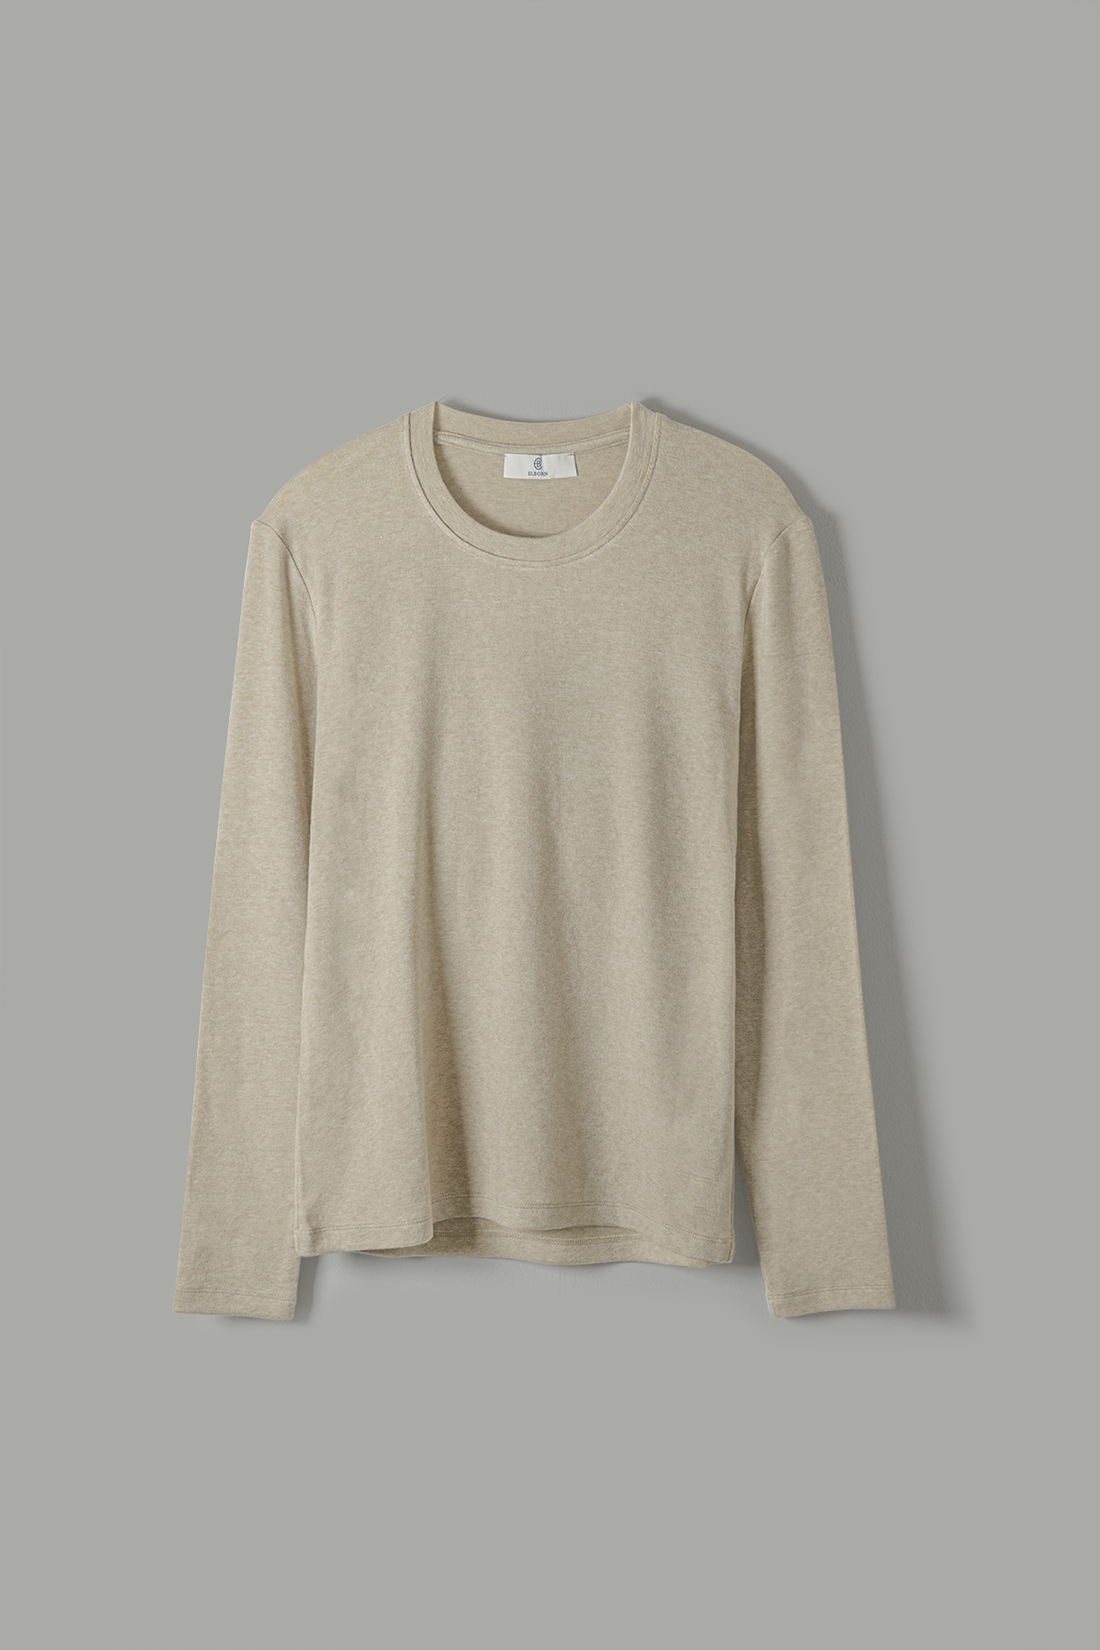 2ND / Wool Blended Jersey Top (3colors)